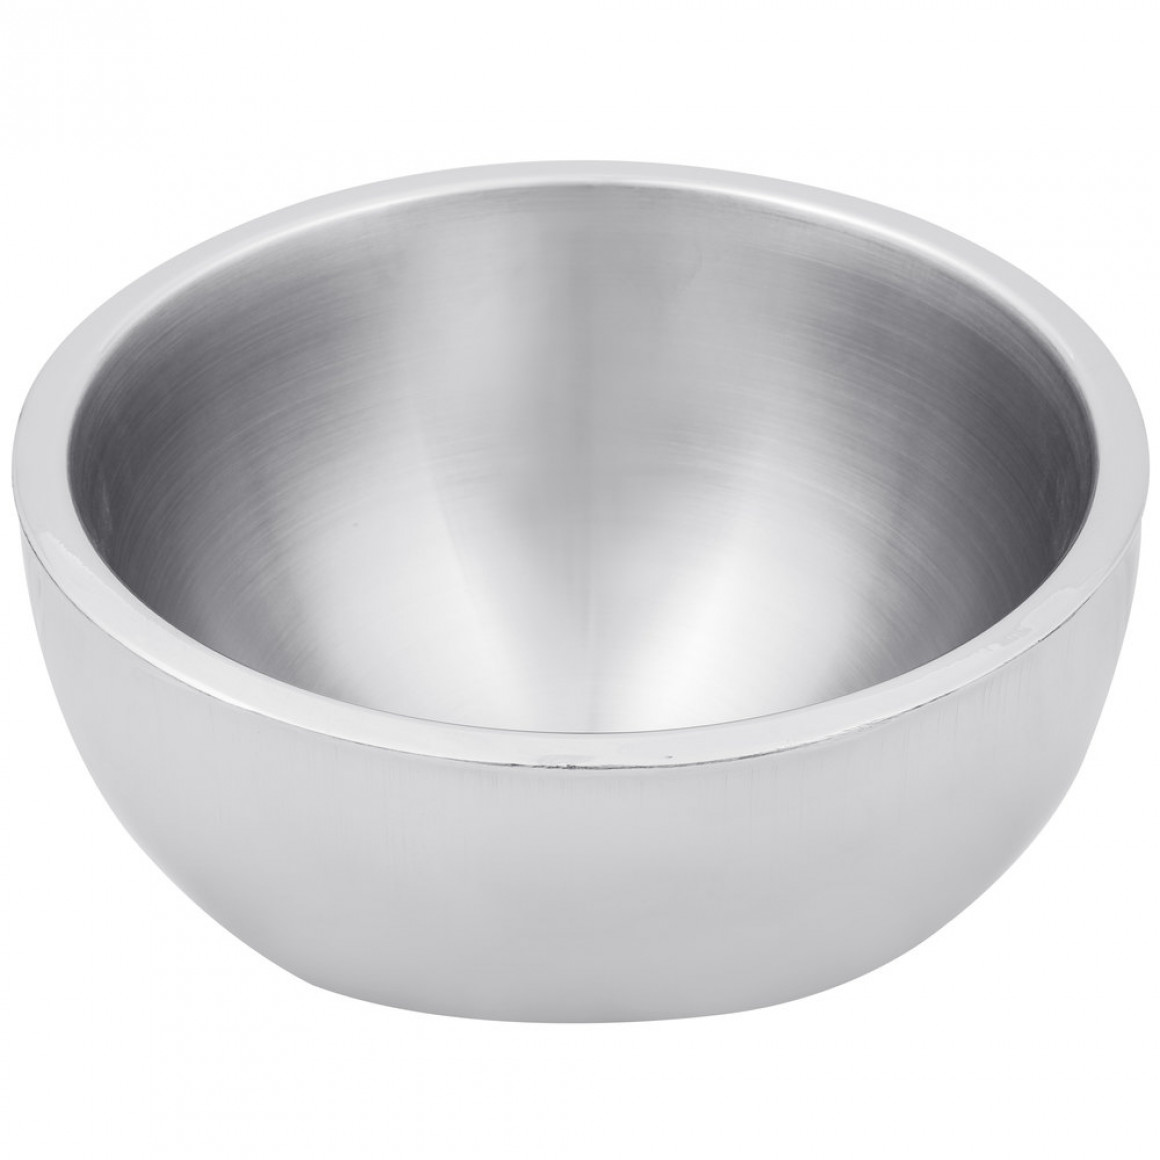 STAINLESS STEEL, SATIN BOWL, DOUBLE WALL, ANGLED, 54 OZ.